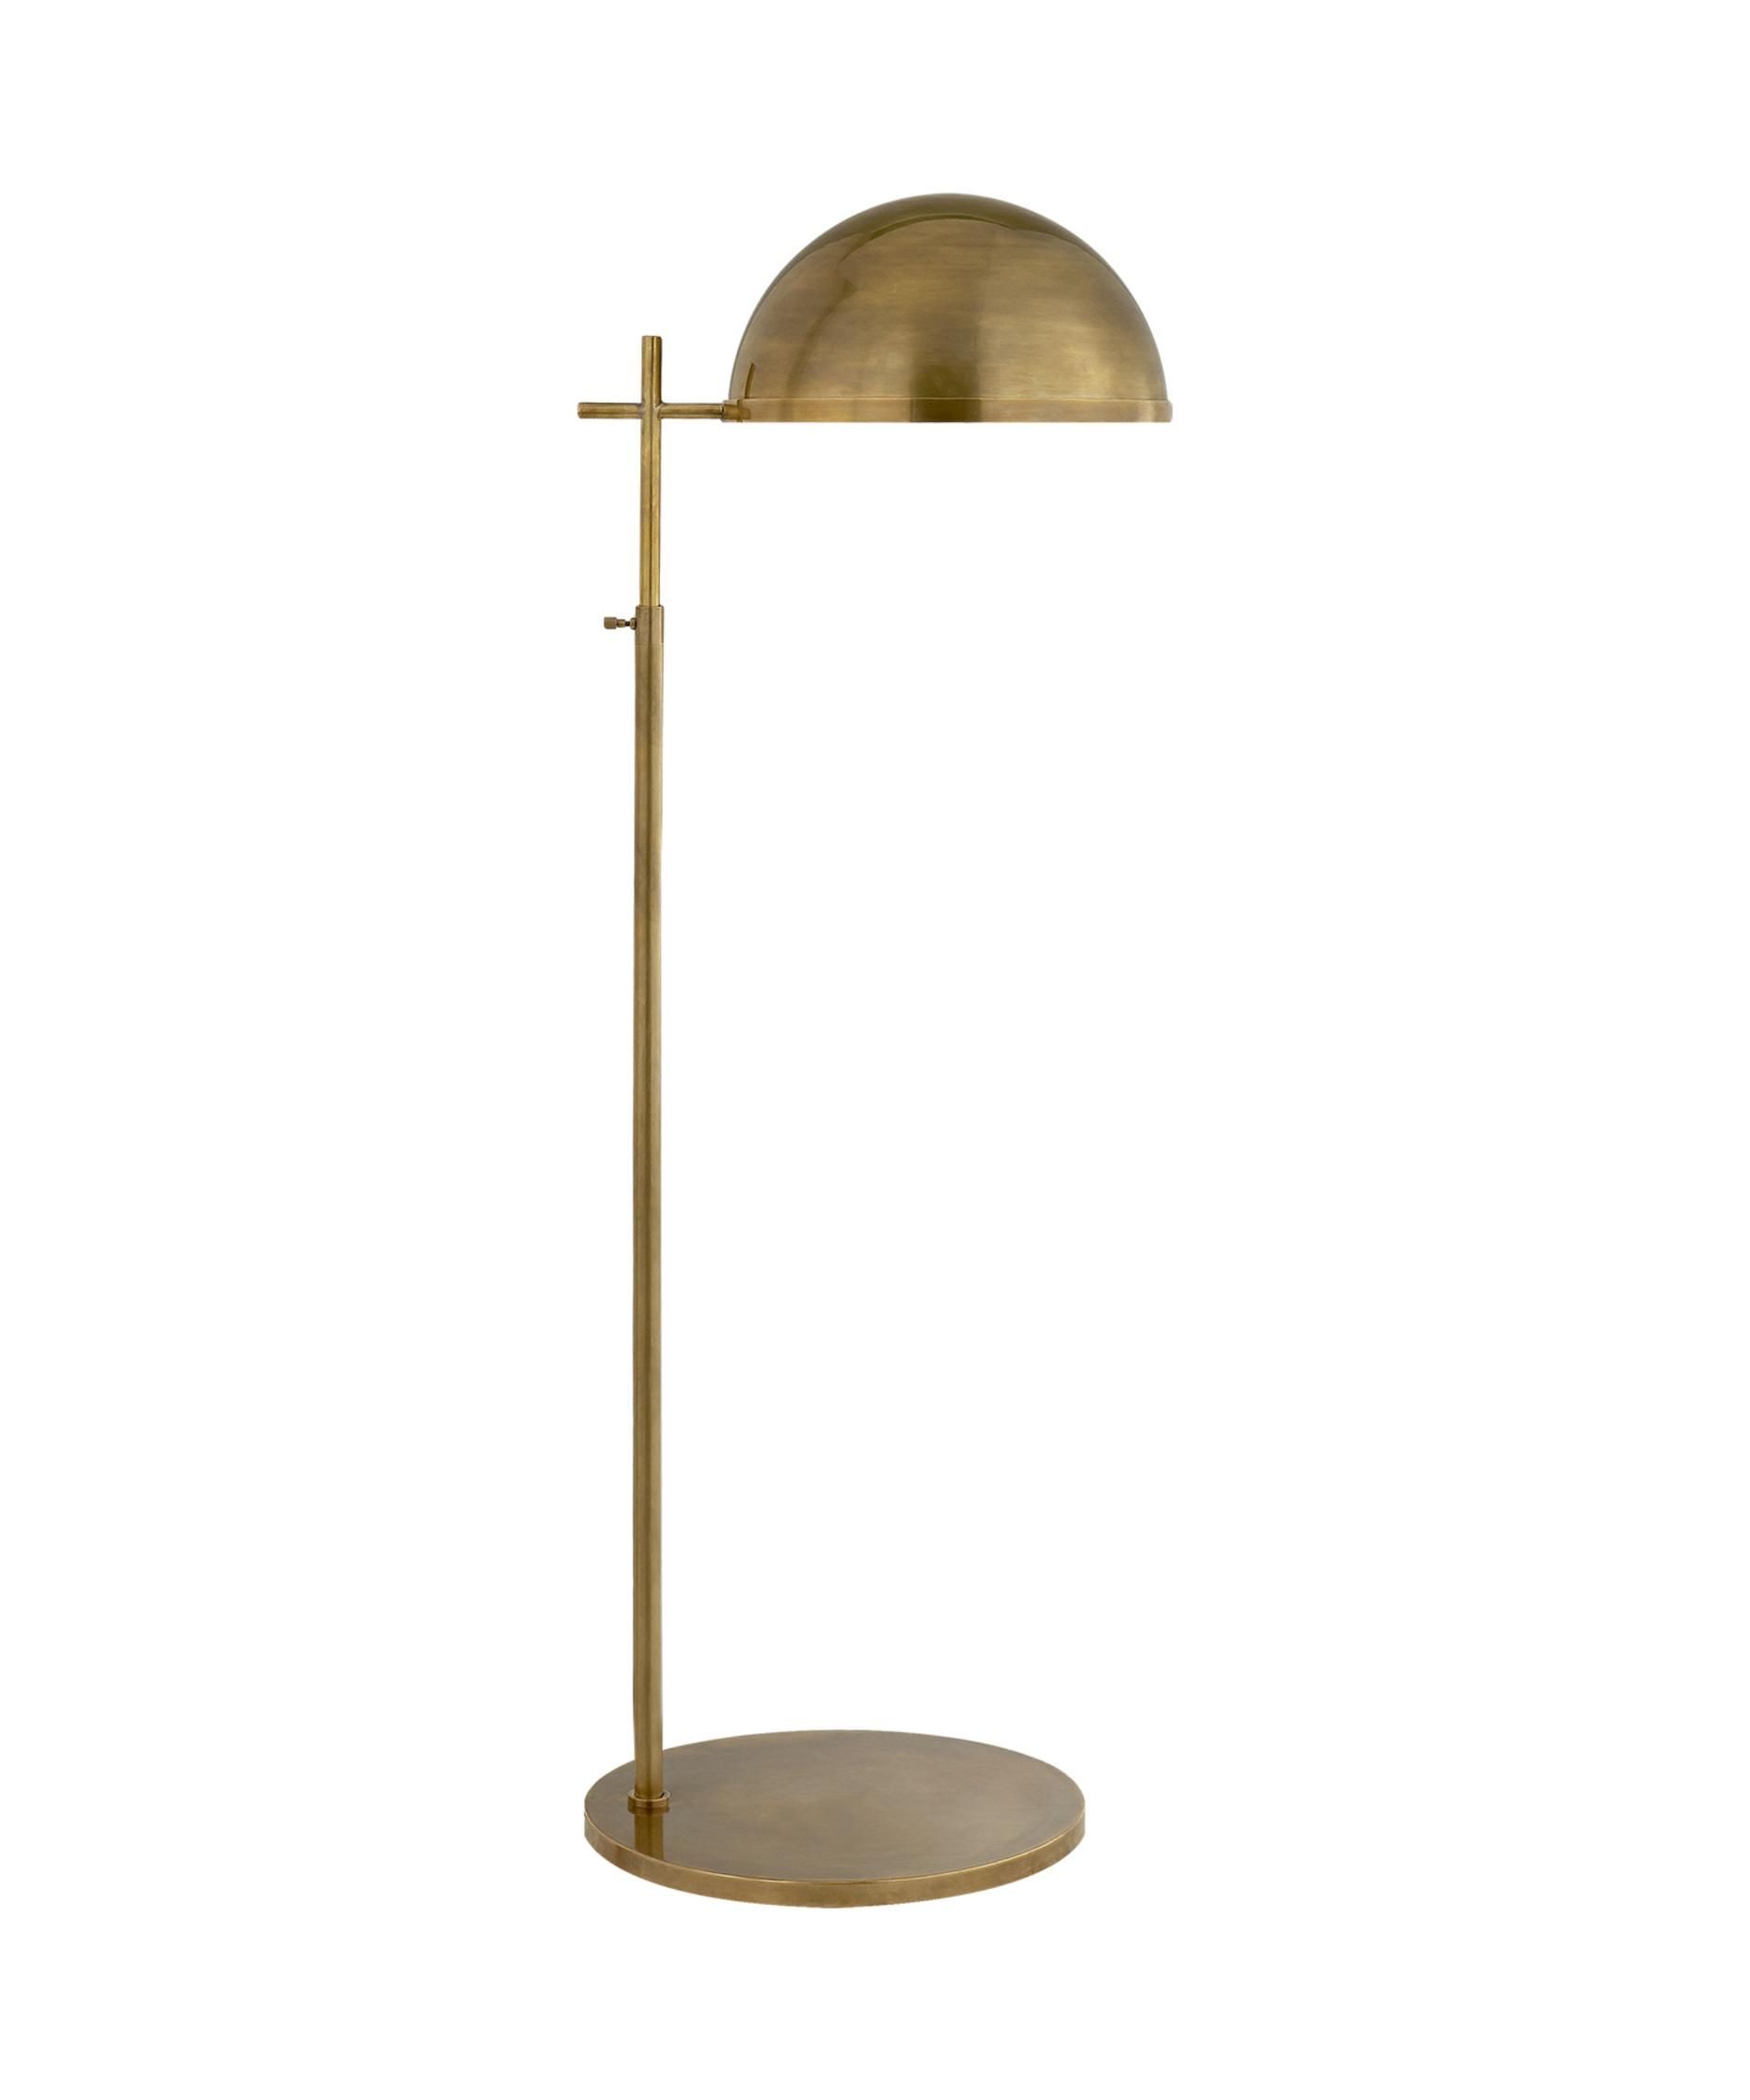 Kelly Wearstler Dulcet 43 Inch Floor Lamp Visual Comfort intended for proportions 1875 X 2250